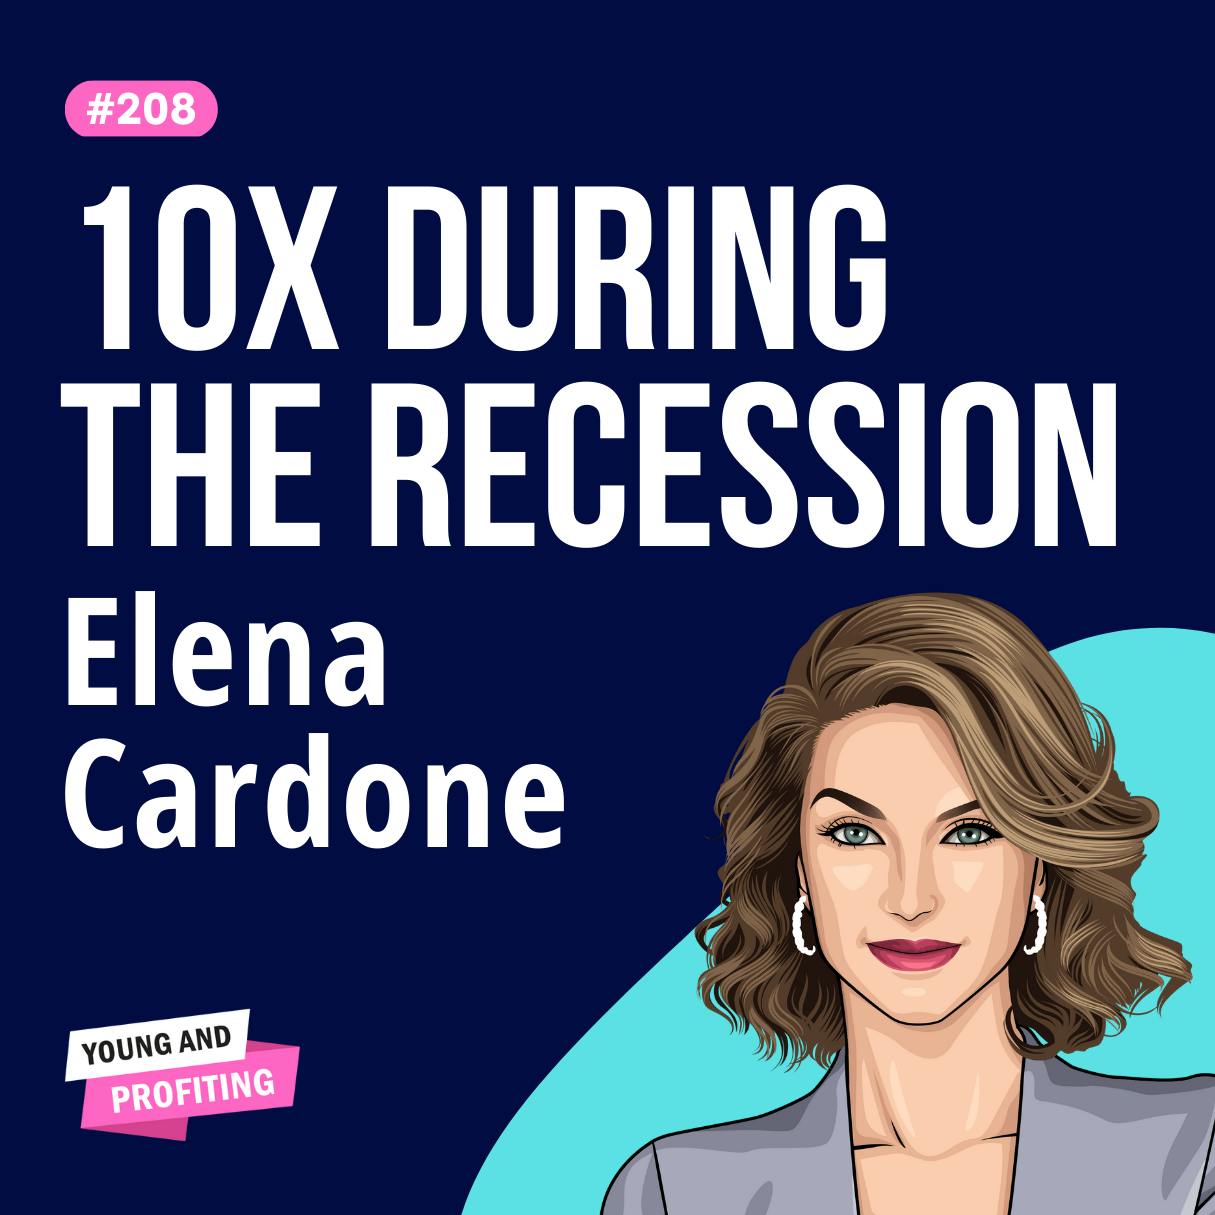 Elena Cardone: How to Find a Partner, 10X Your Life, and Build a Real Estate Empire | E208